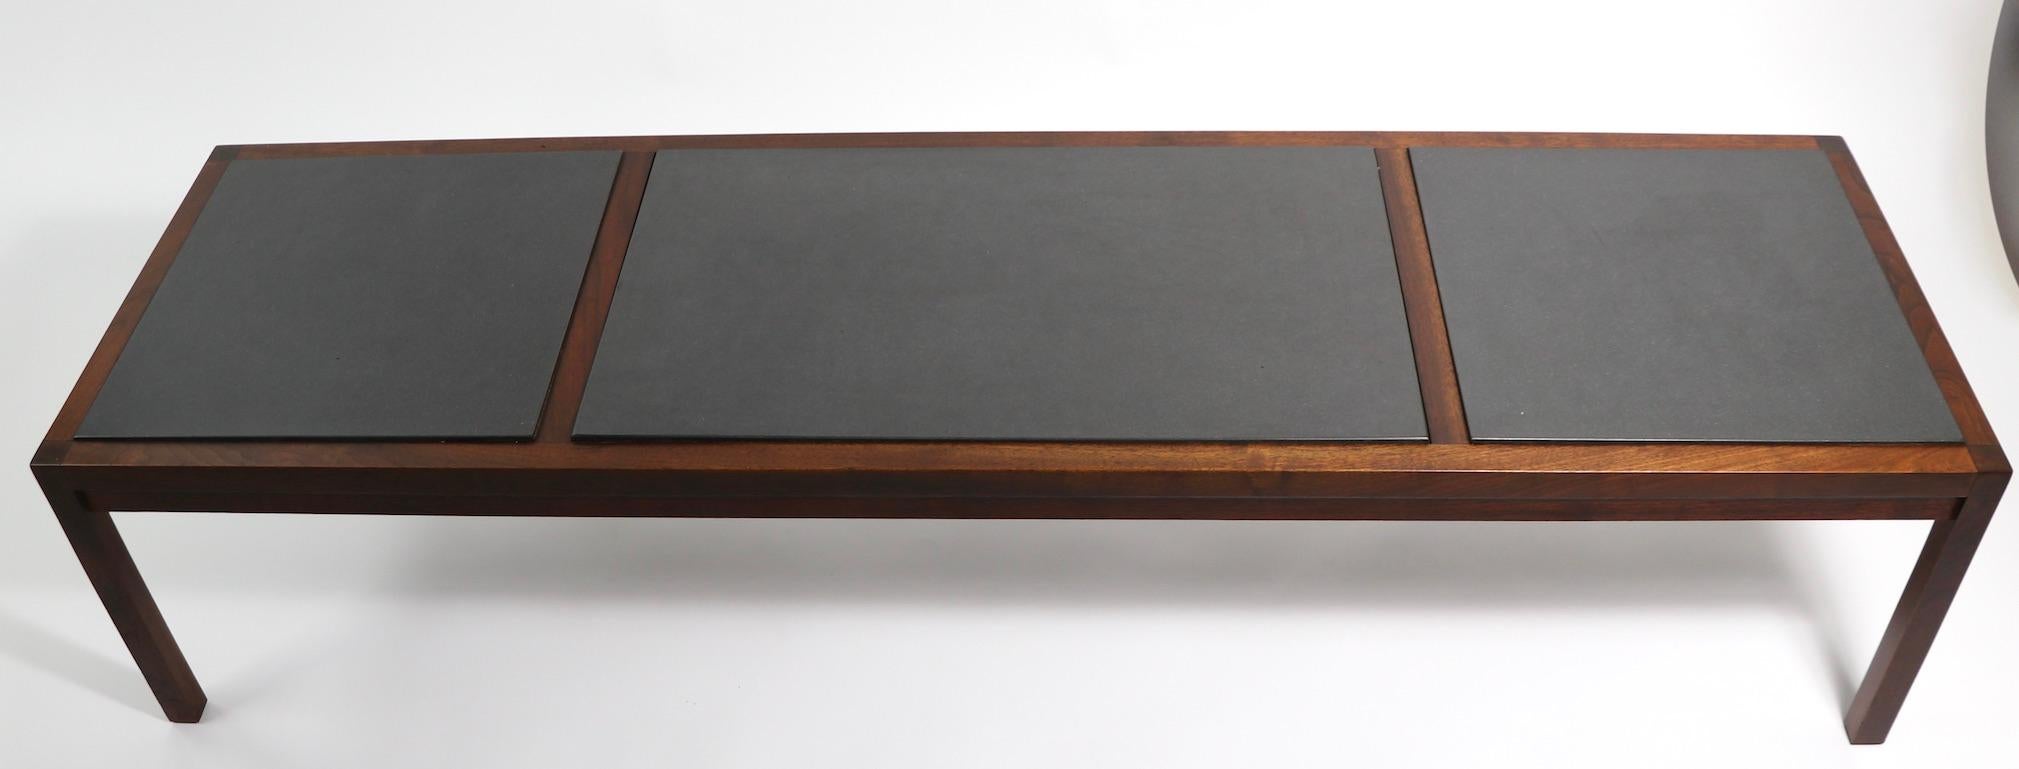 20th Century Mid-Century Modern Coffee Table after Dunbar For Sale